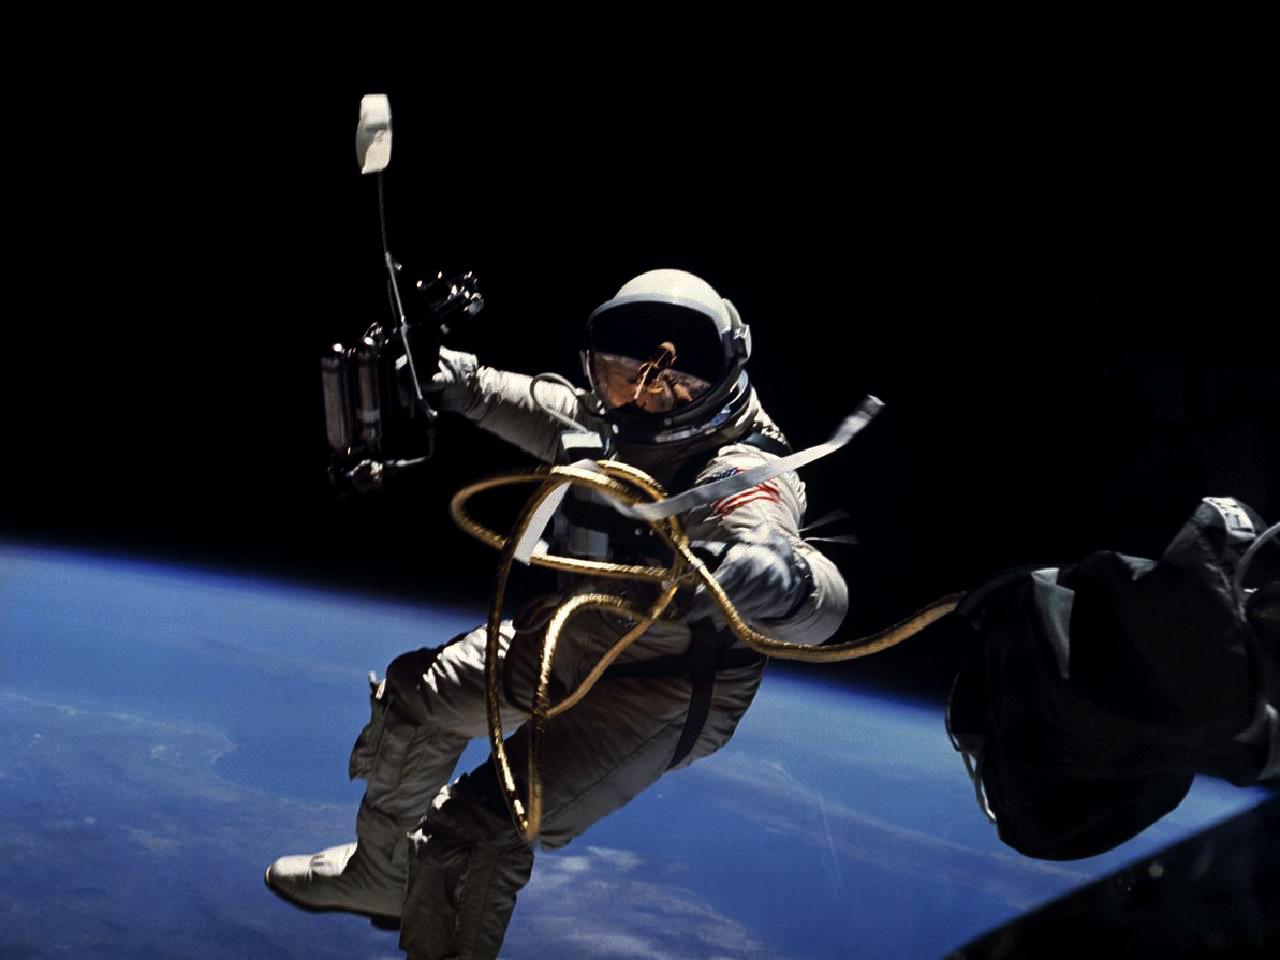 An astronaut in a white spacesuit is shown floating with the Earth's horizon in the background. The astronaut is connected to an unseen spacecraft via an umbilical, which extends into the foreground.